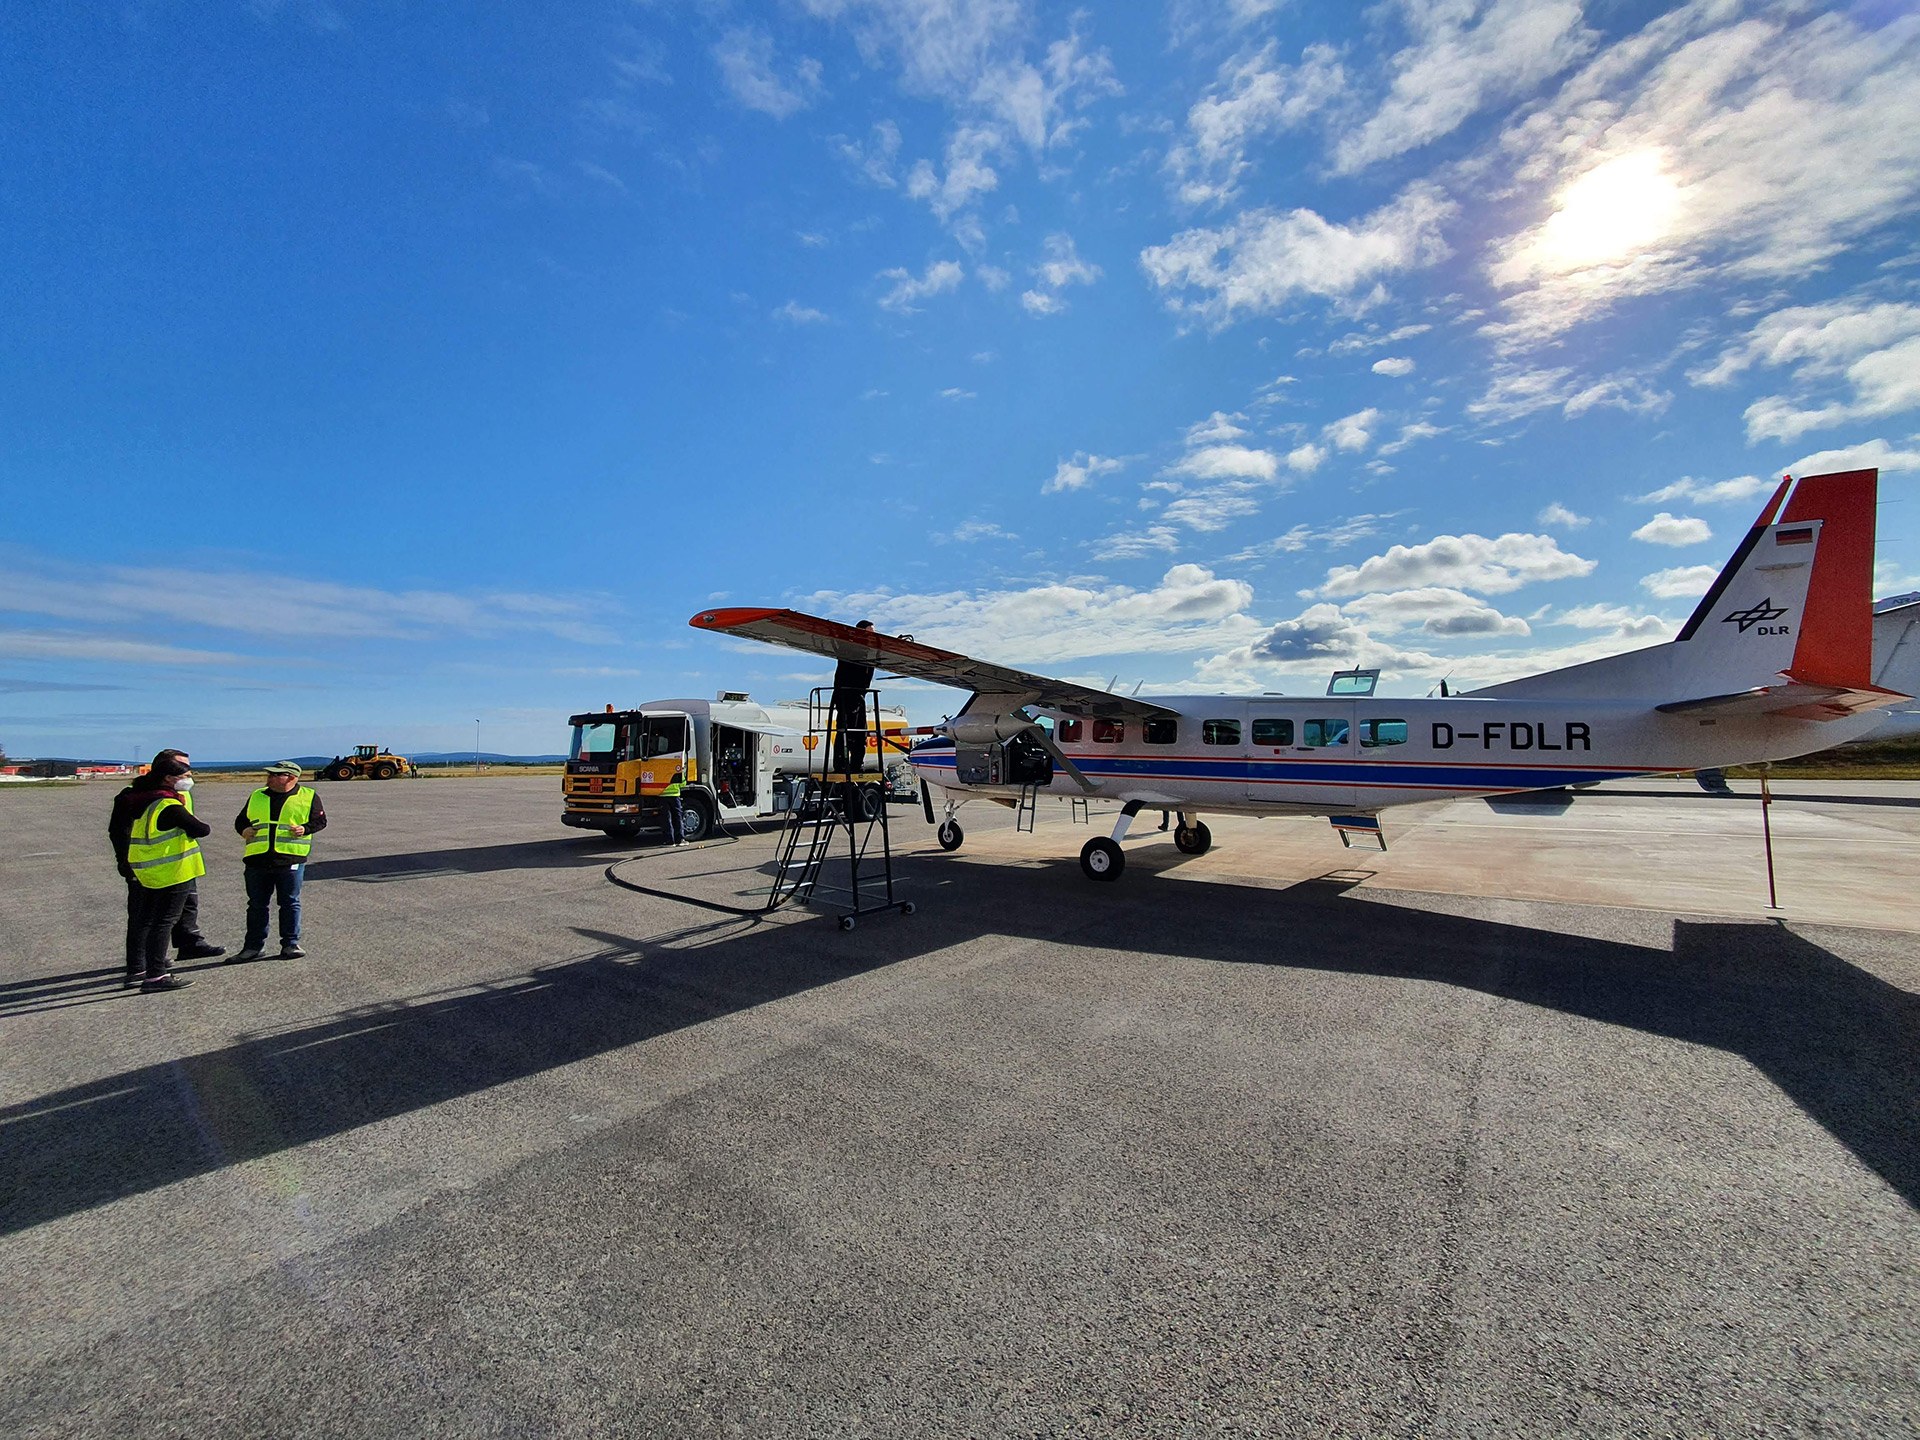 DLR Cessna at a refuelling stop